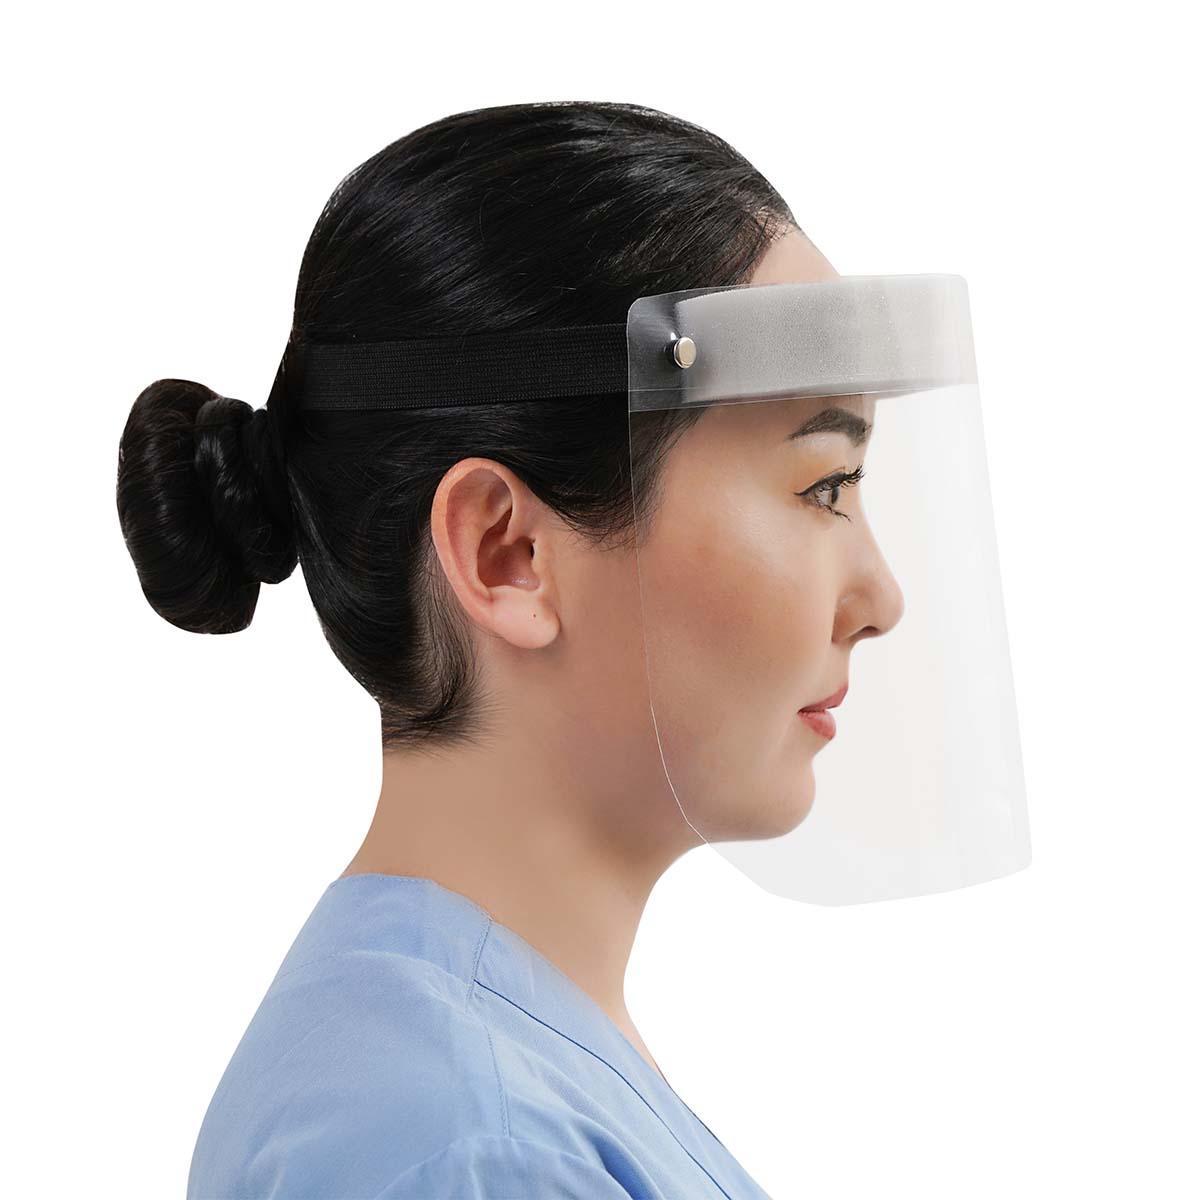 Clear Vision Comfort Face Shield Image